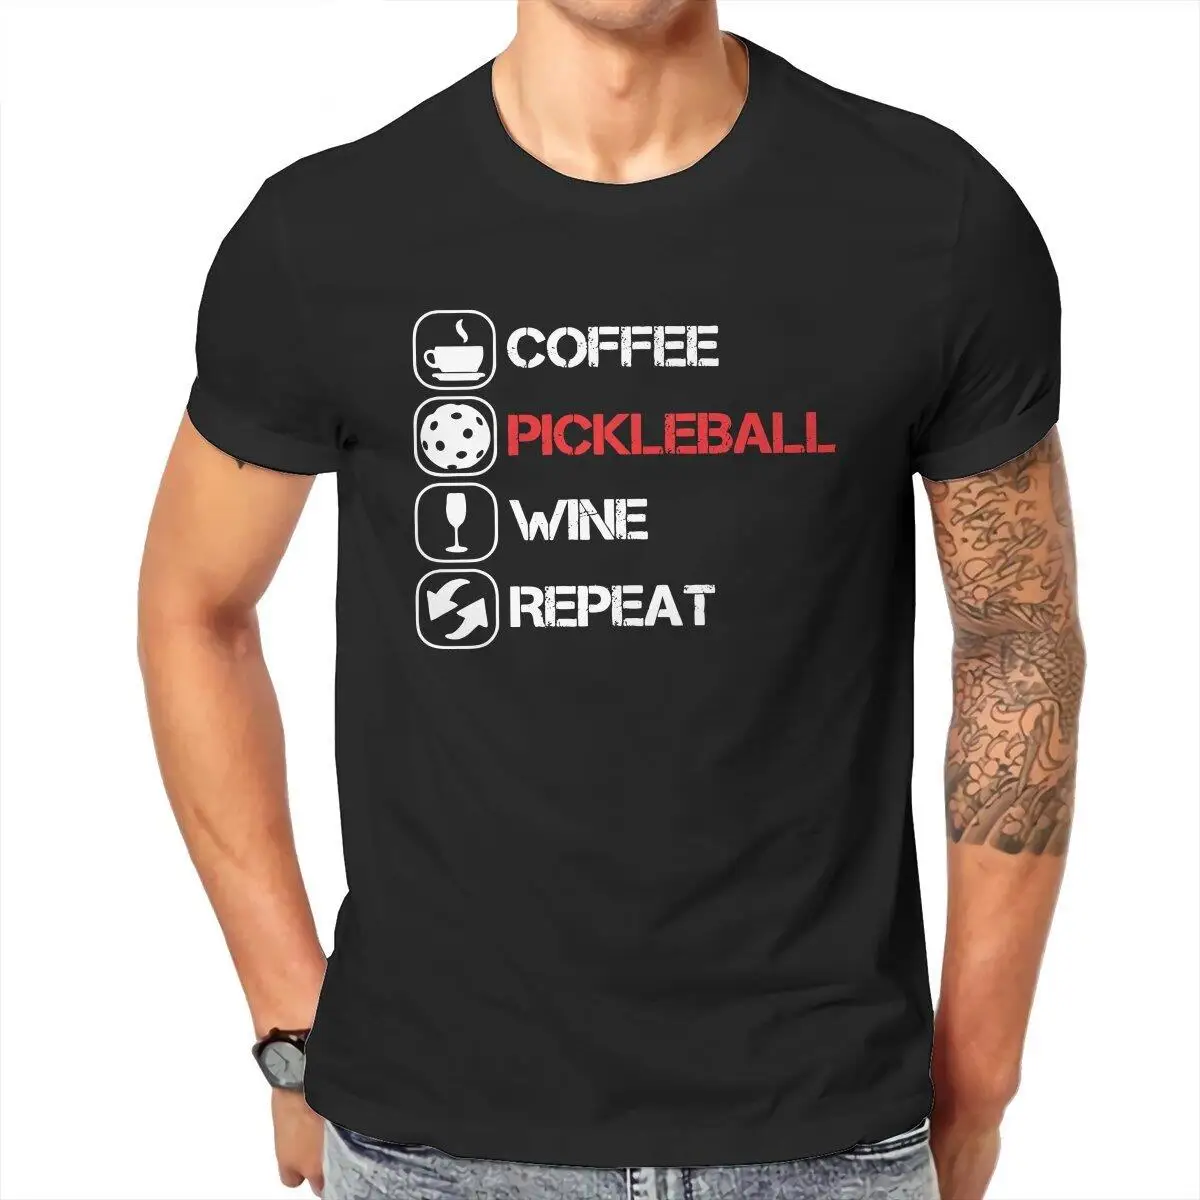 

Hipster Coffee Pickleball Wine Repeat T-Shirts for Men Round Neck Cotton T Shirts Short Sleeve Tee Shirt Big Size Clothing